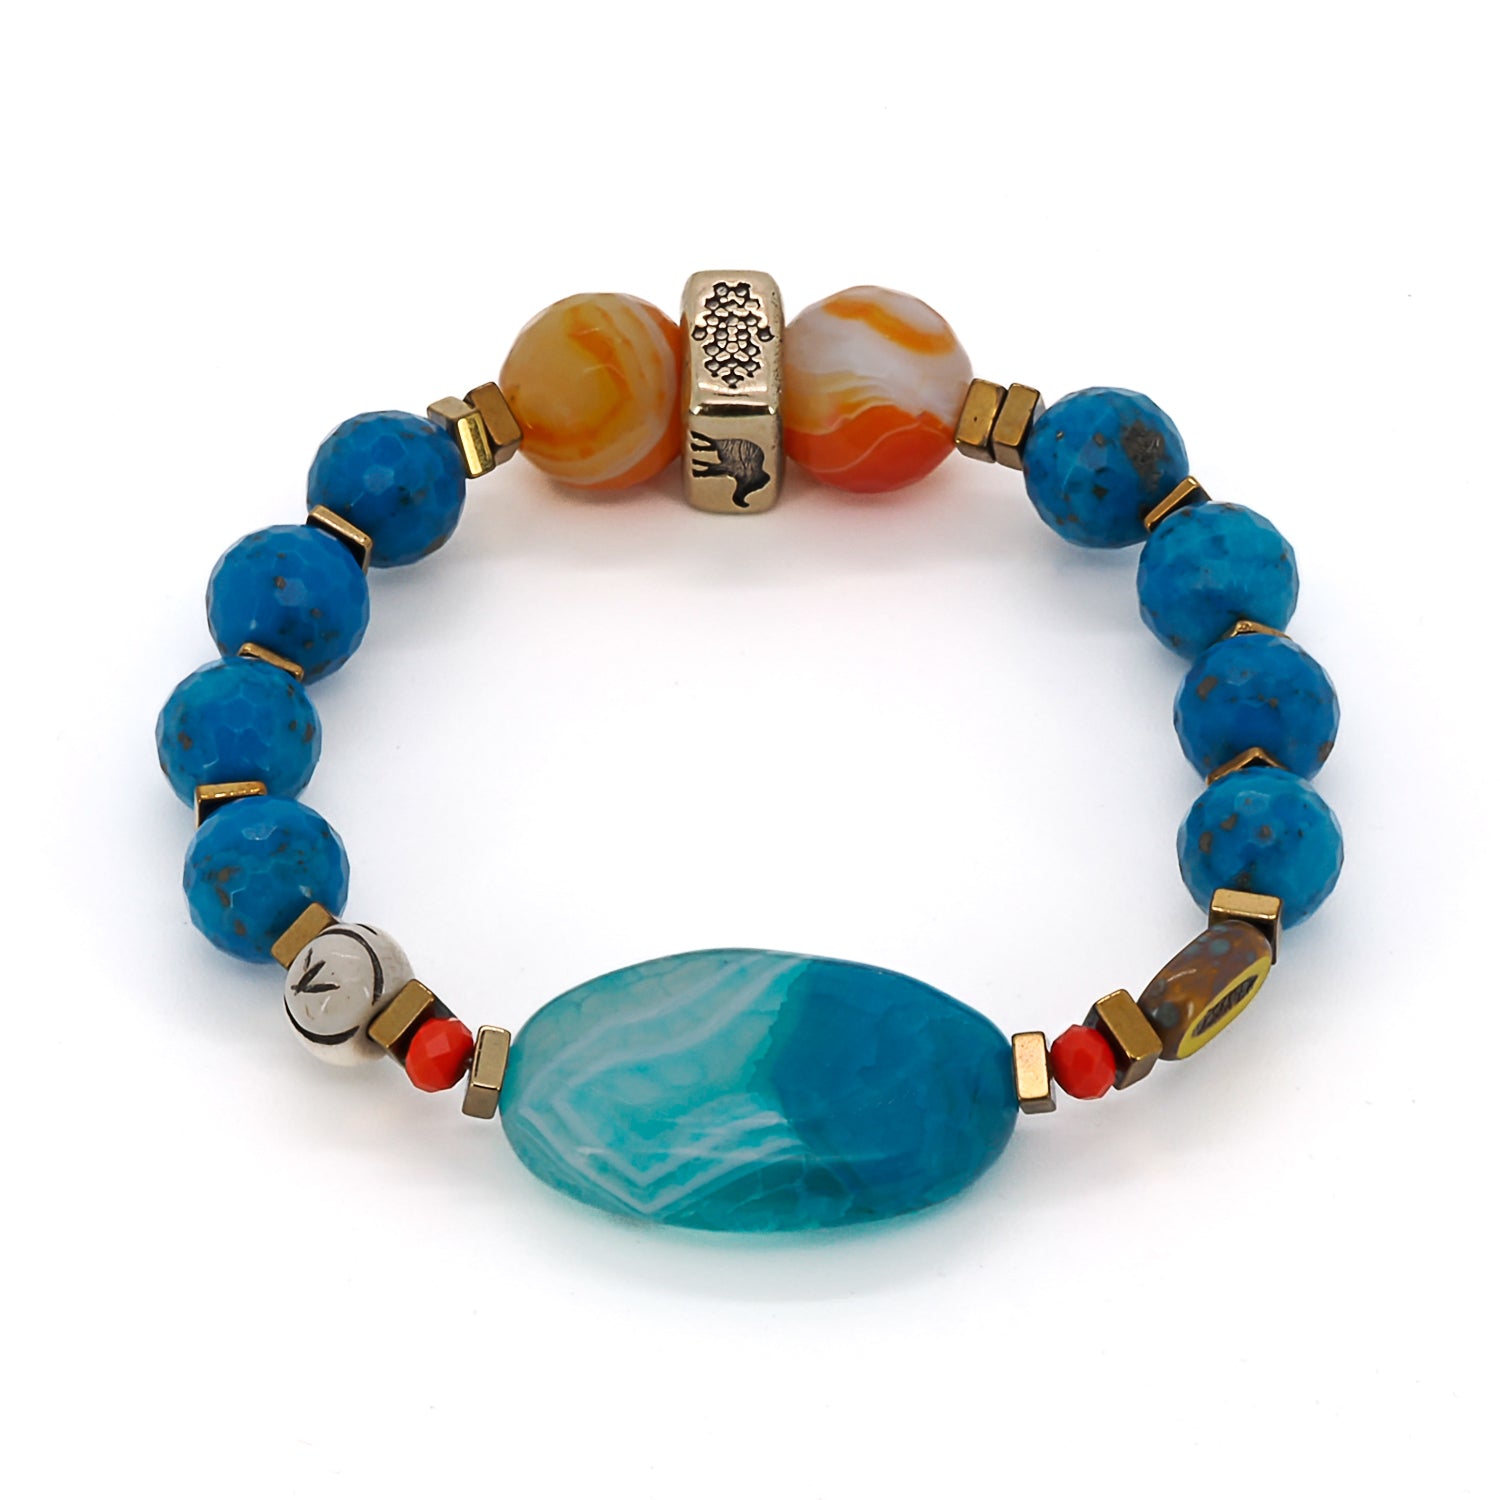 The Blue Agate Summer Vibe Bracelet is a handmade accessory that exudes a sense of energy and vitality.